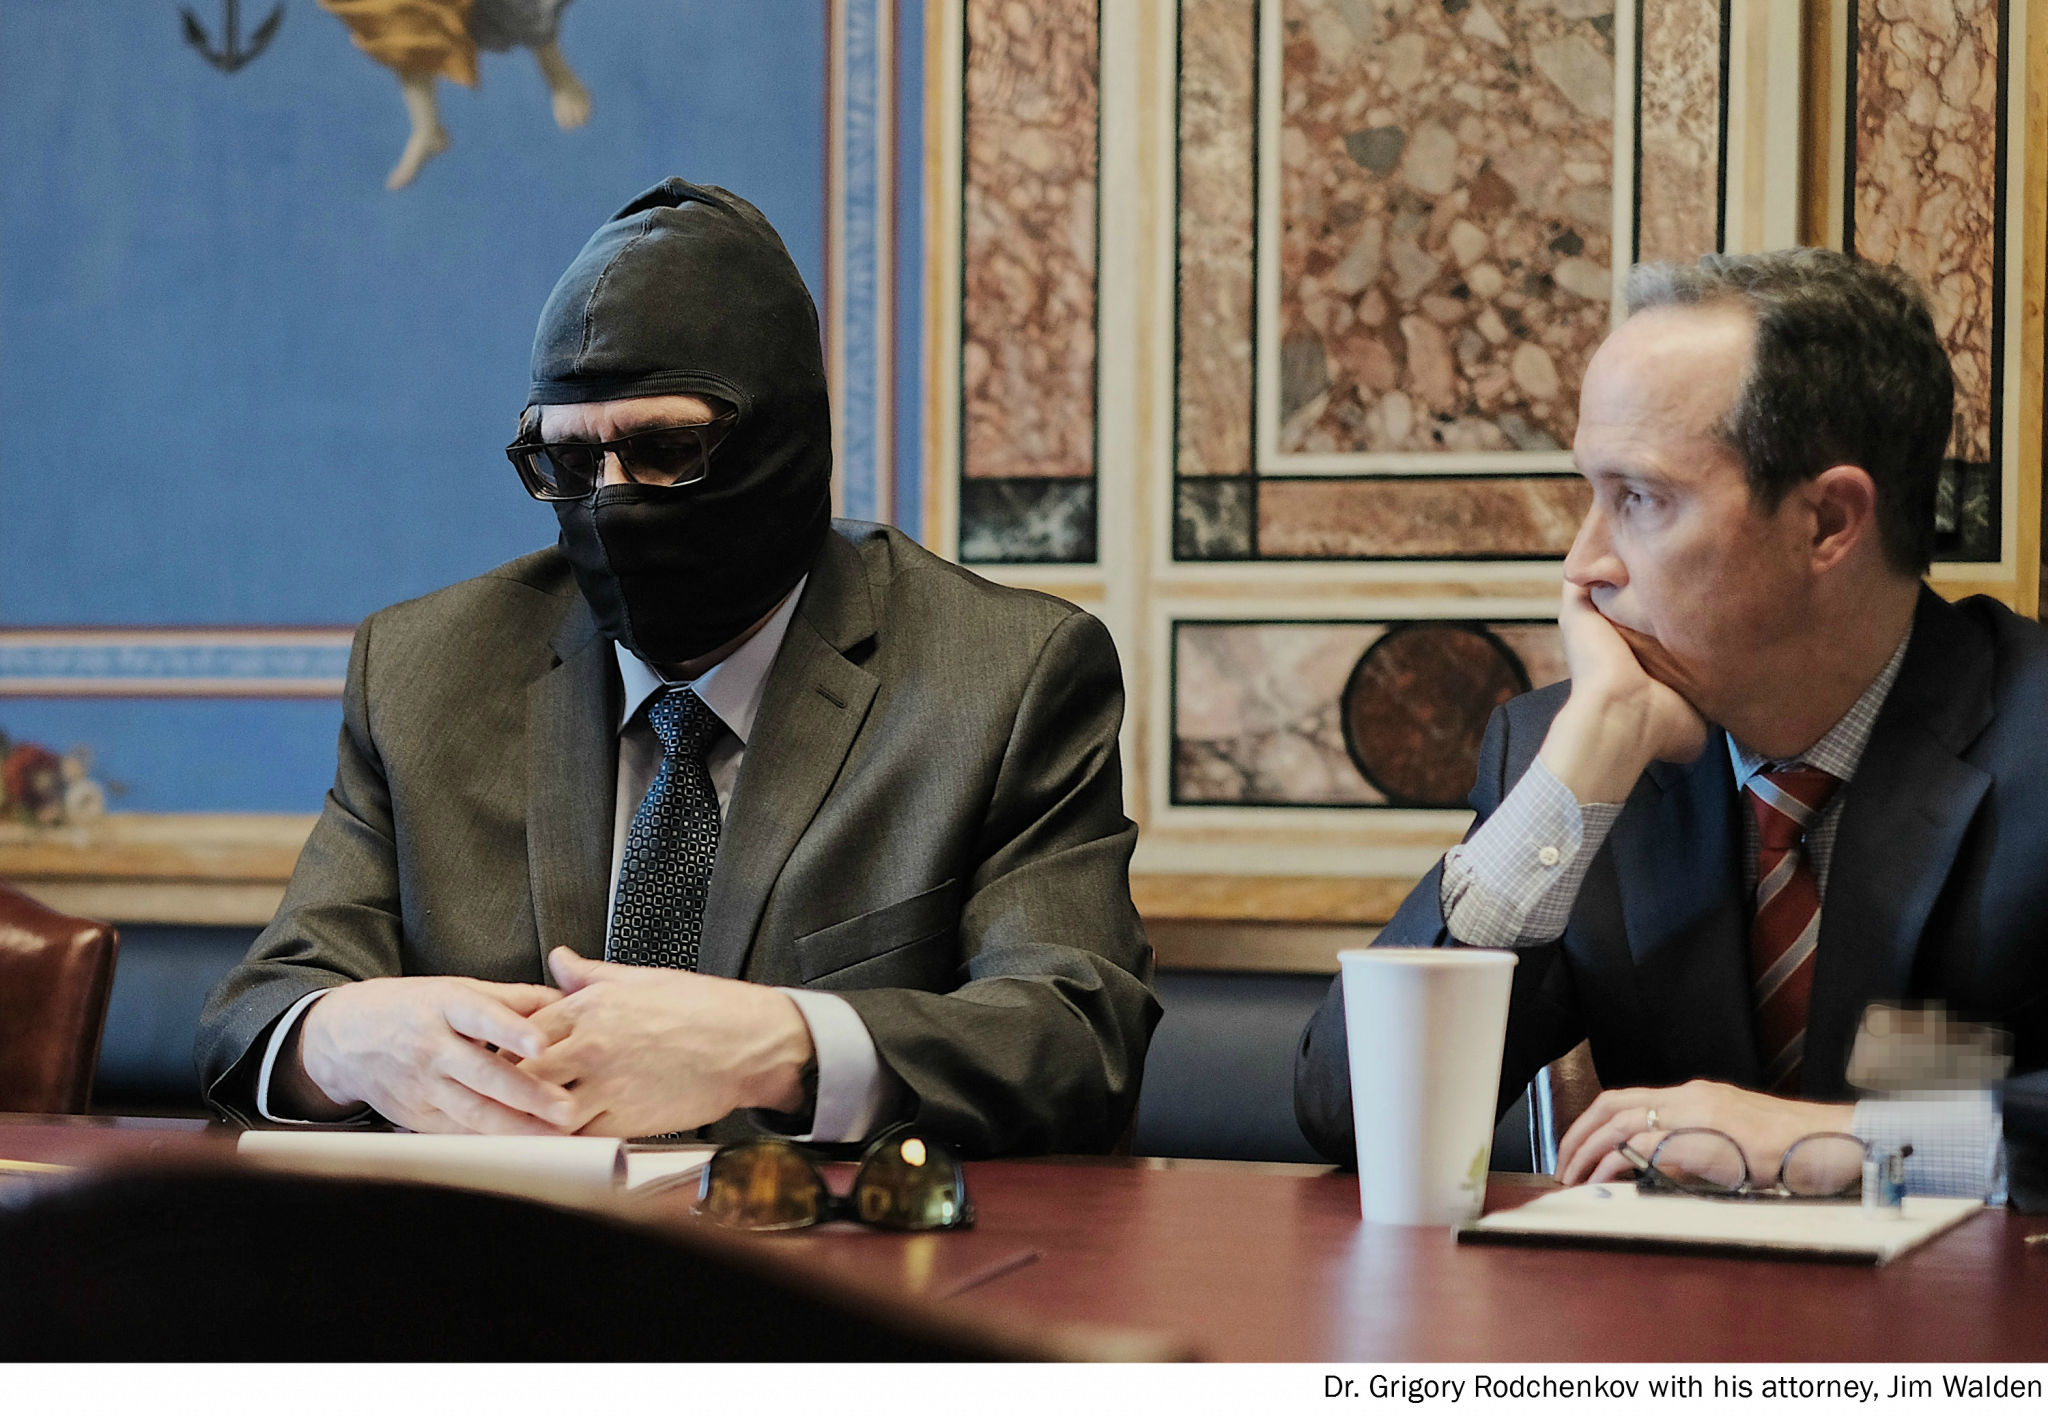 Grigory Rodchenkov wore a mask to hide his identity at the meeting ©Helsinki Commission